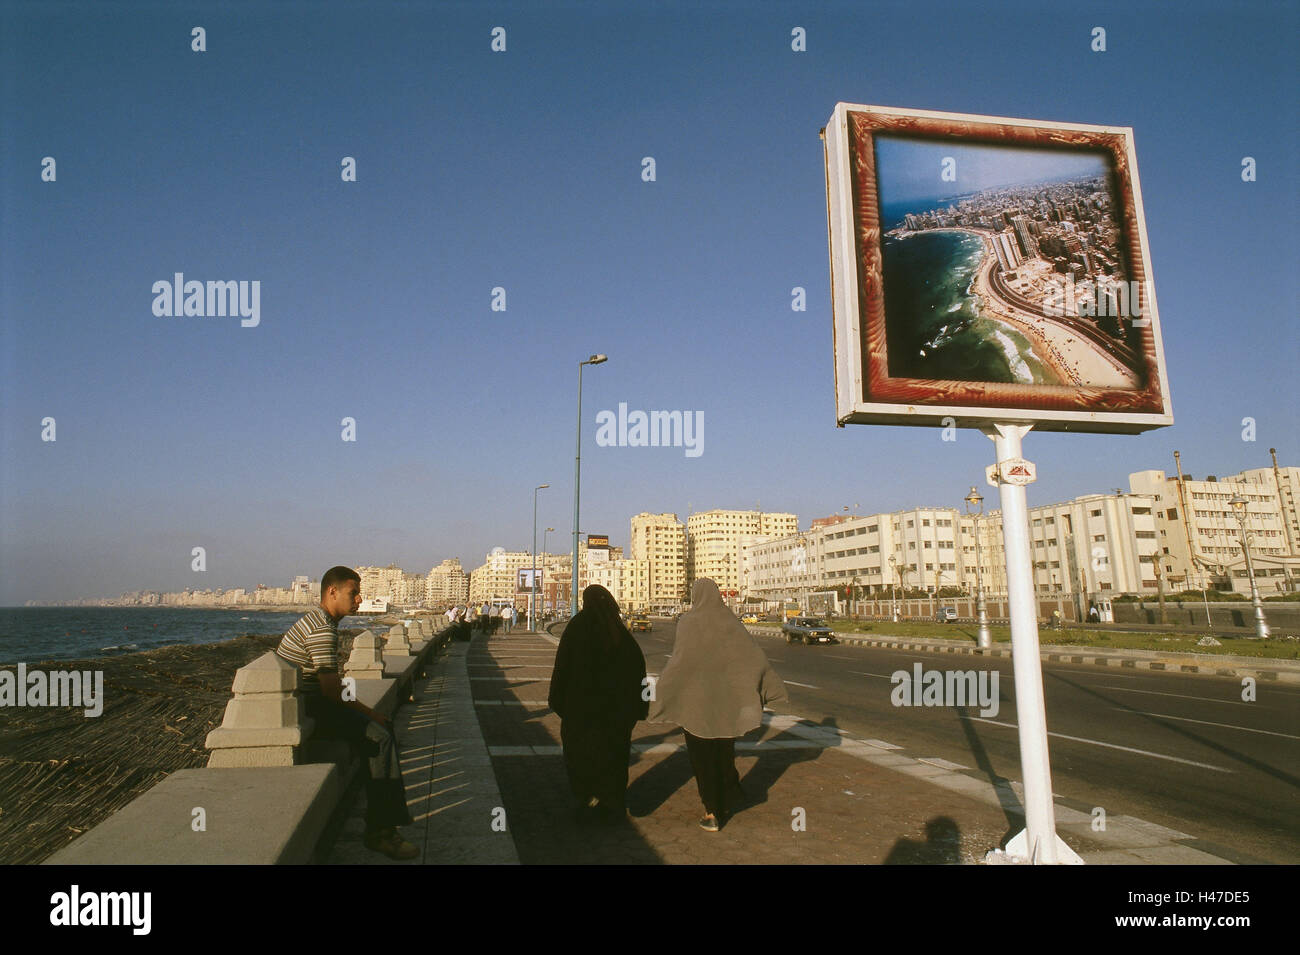 Egypt, Alexandria, Corniche, Uferstrasse, promenade, sign, coastal overview, passer-by, sea, Nordostafrika, coast, port, town, town view, street, bank promenade, high rises, traffic, person, pedestrian, advertising signs, advertising notice board, east harbour, harbour, Mediterranean coast, the Mediterranean Sea, Stock Photo